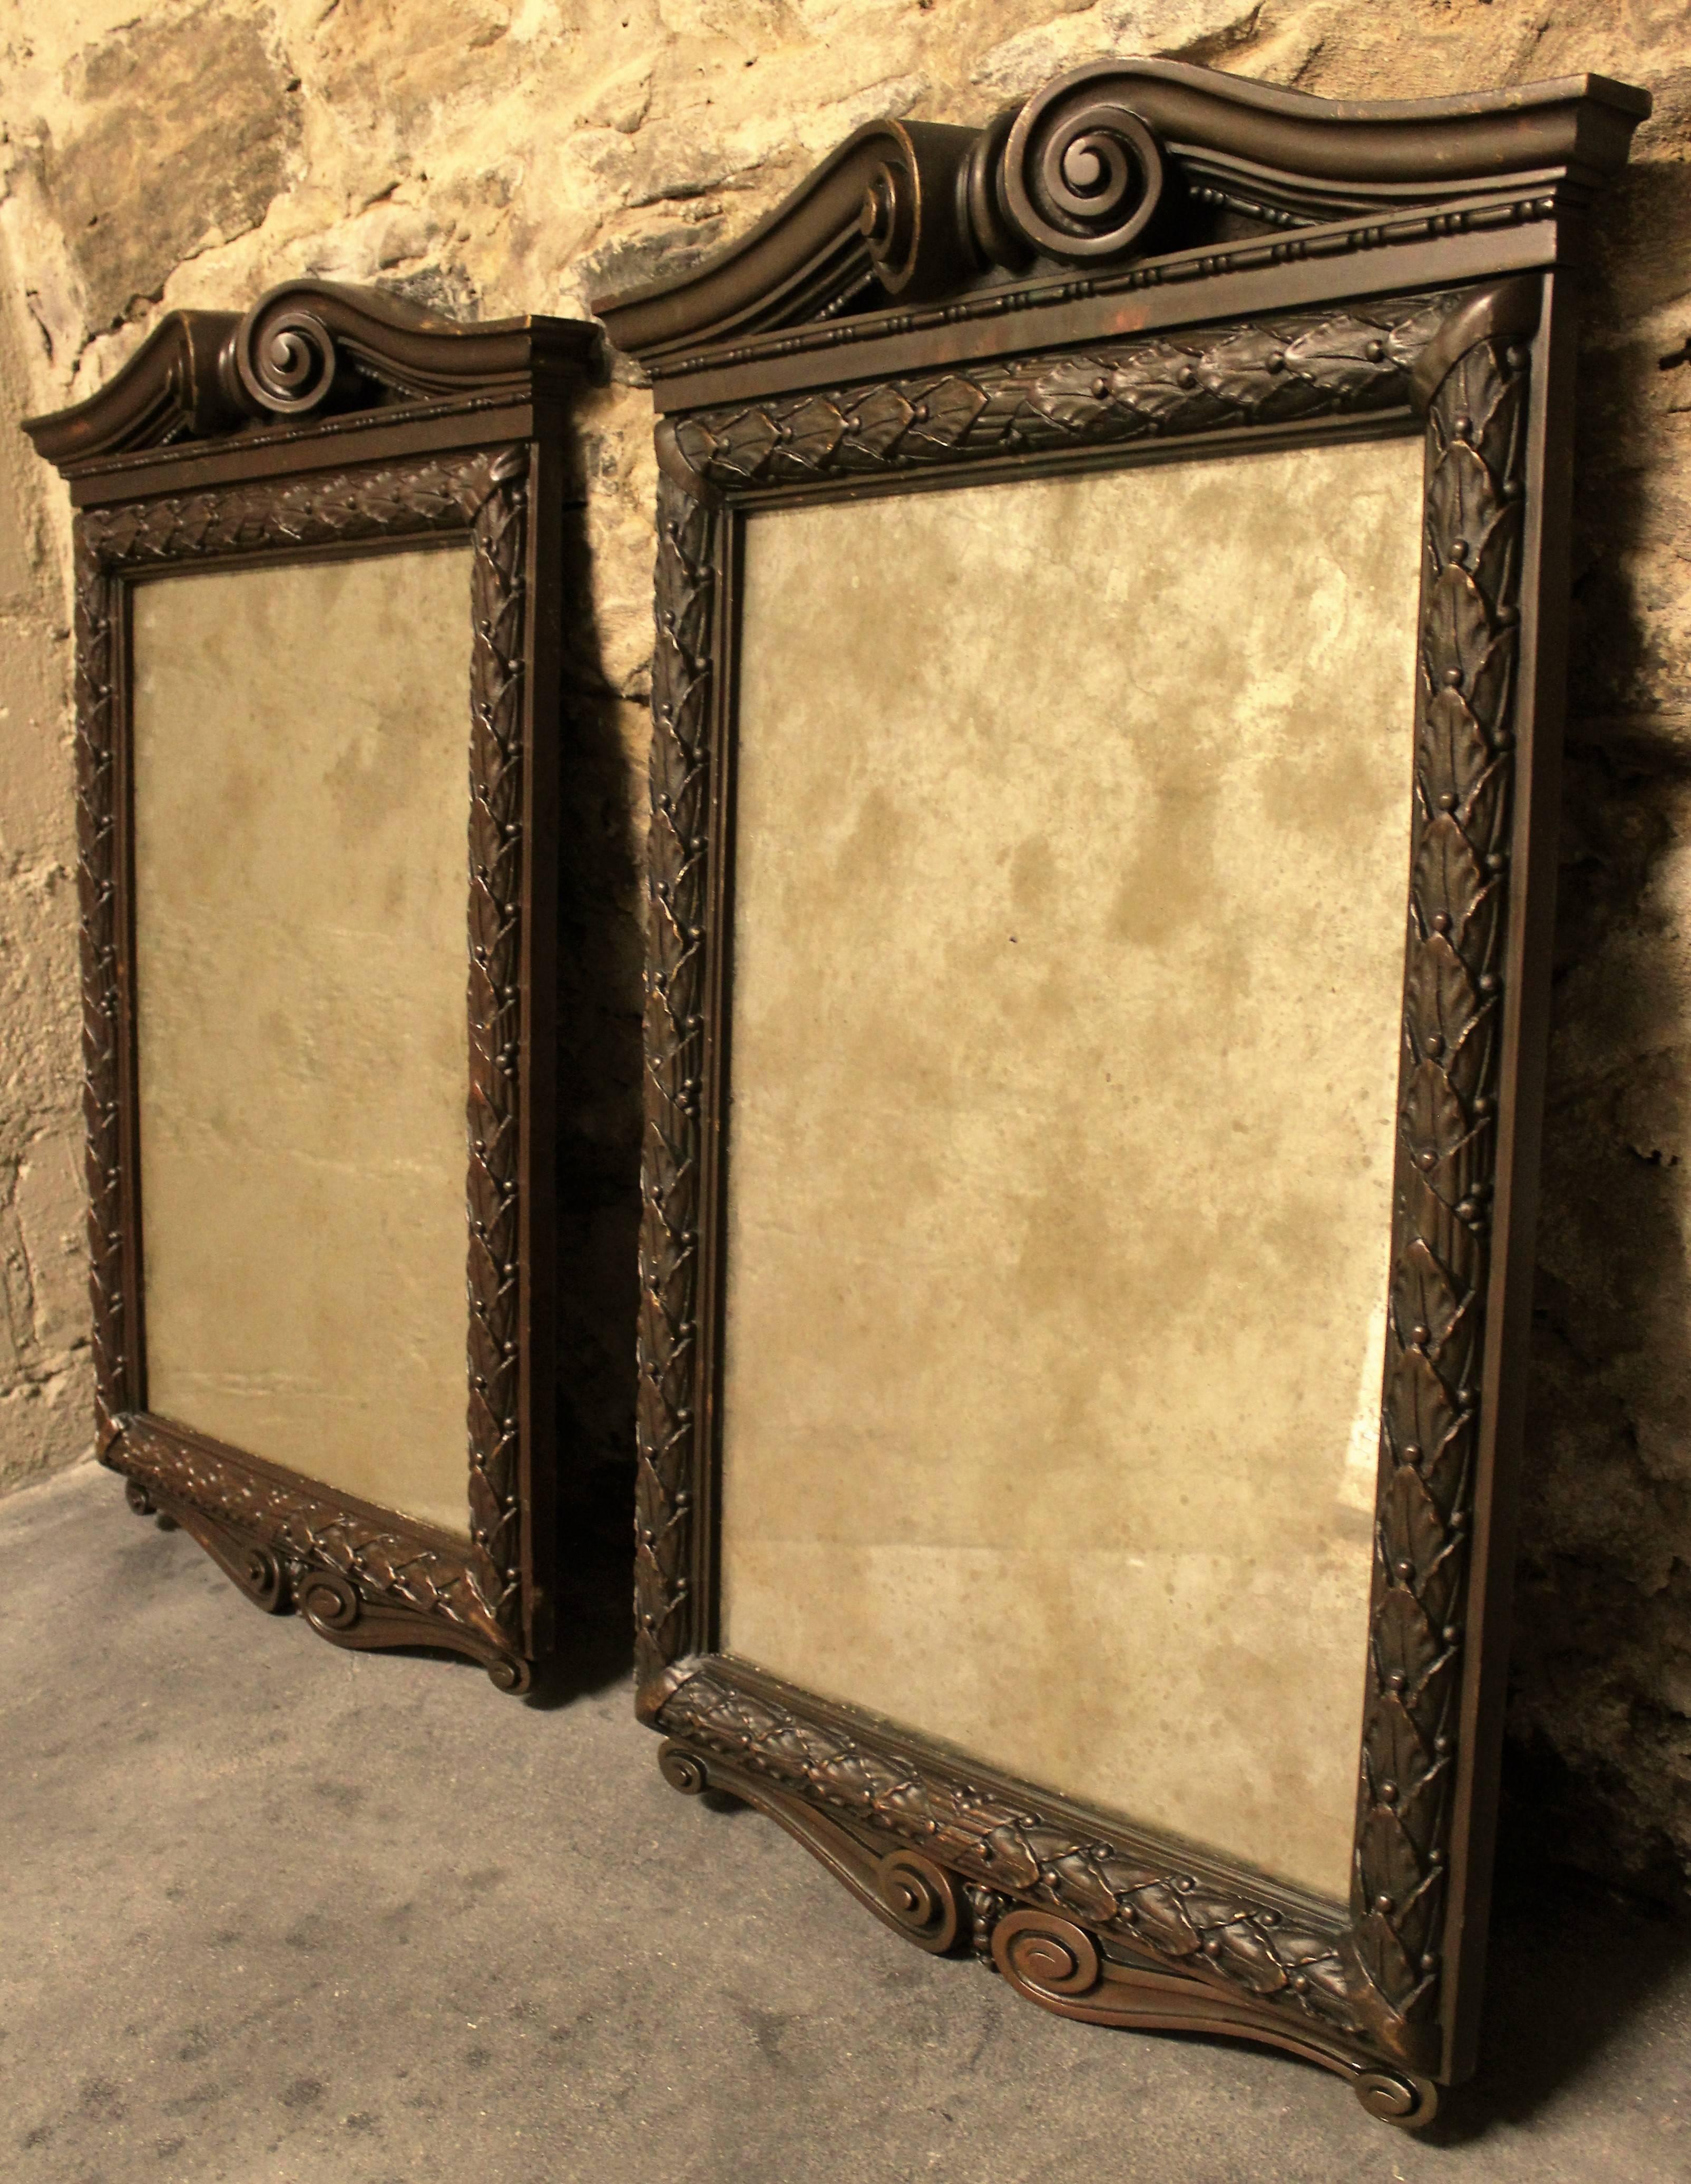 Pair of solid bronze neoclassical mirrors.